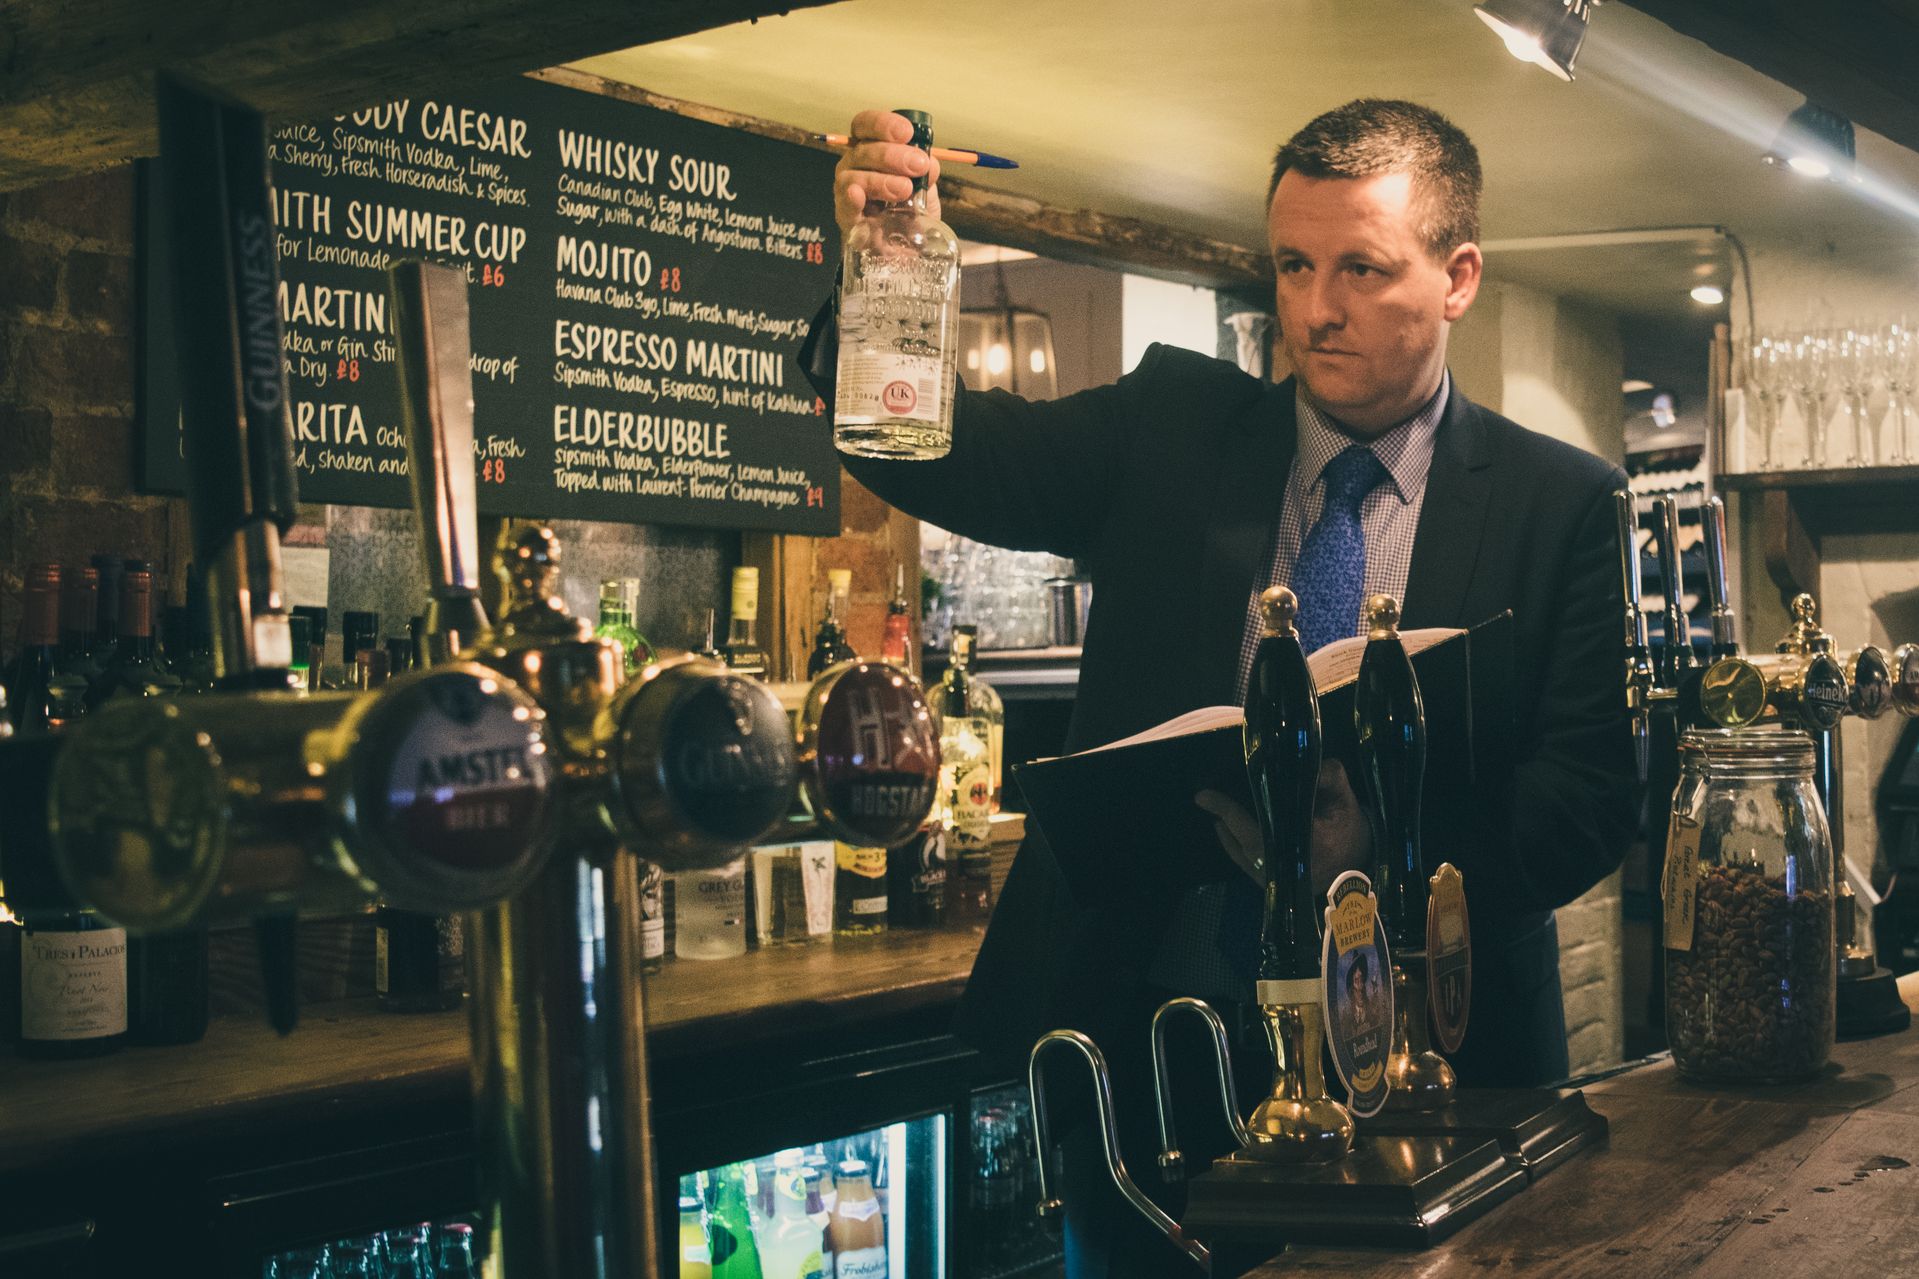 A Venners stocktaker completing a stocktake or stock audit by counting bottles of liquor in a pub.